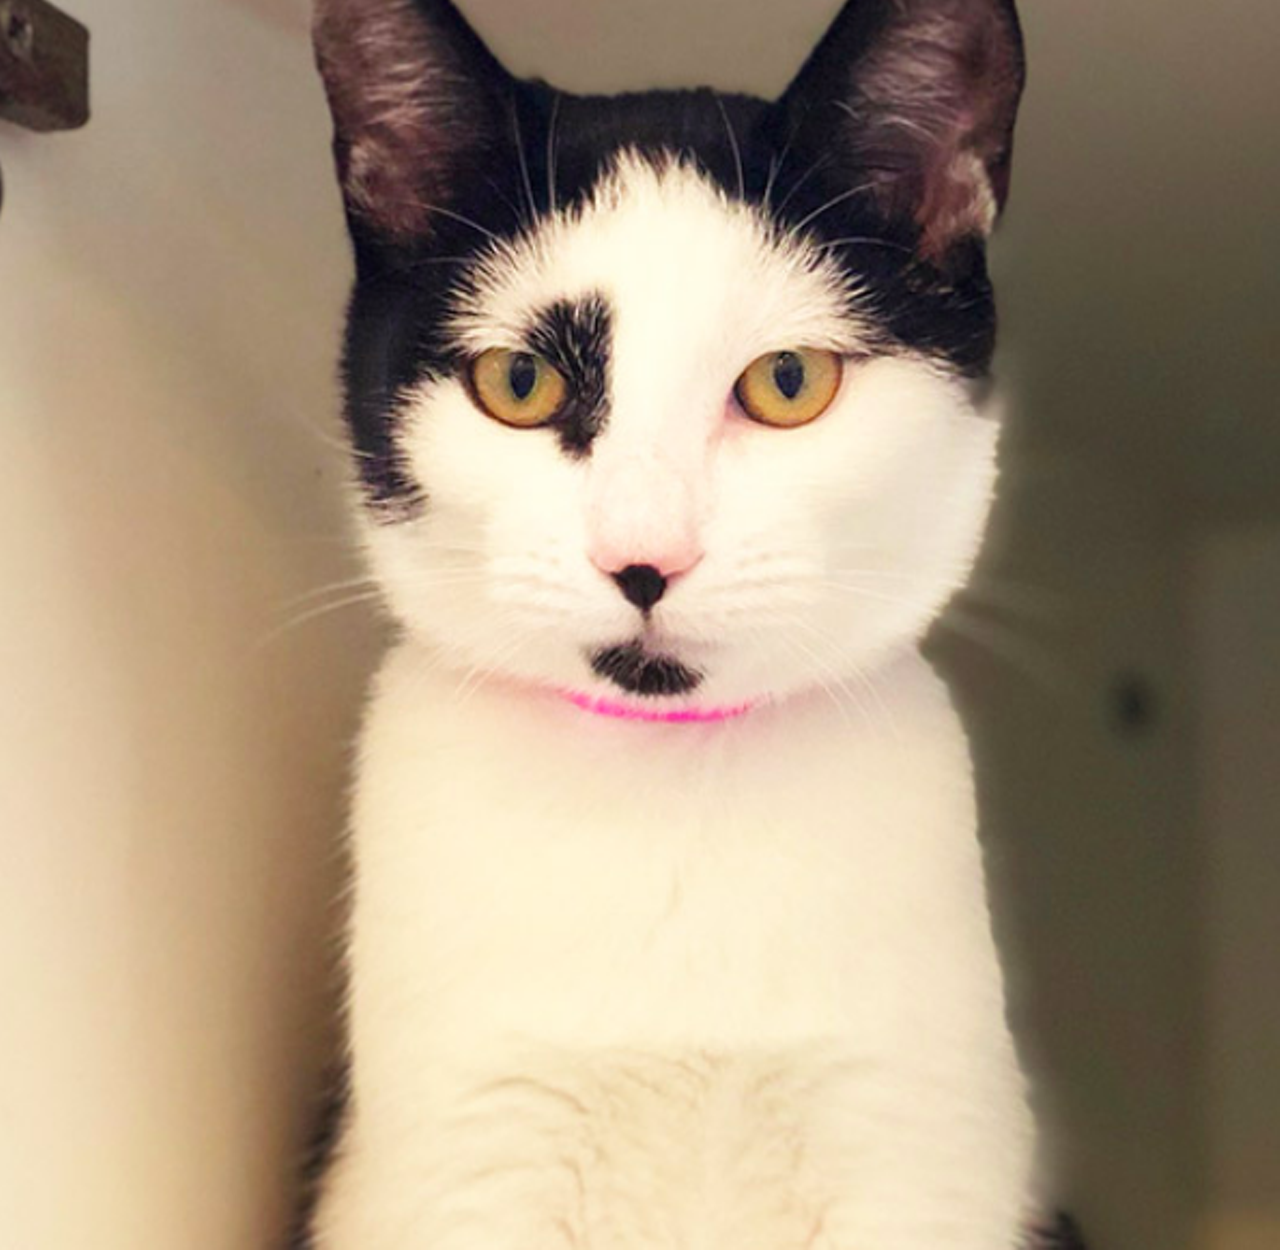 Daffodil
"I’m a spunky and energetic kitty. Sometimes my playfulness can be off putting for other cats but I really enjoy their company. I’m very social and I do well with children, too. Someone should come adopt me today!"